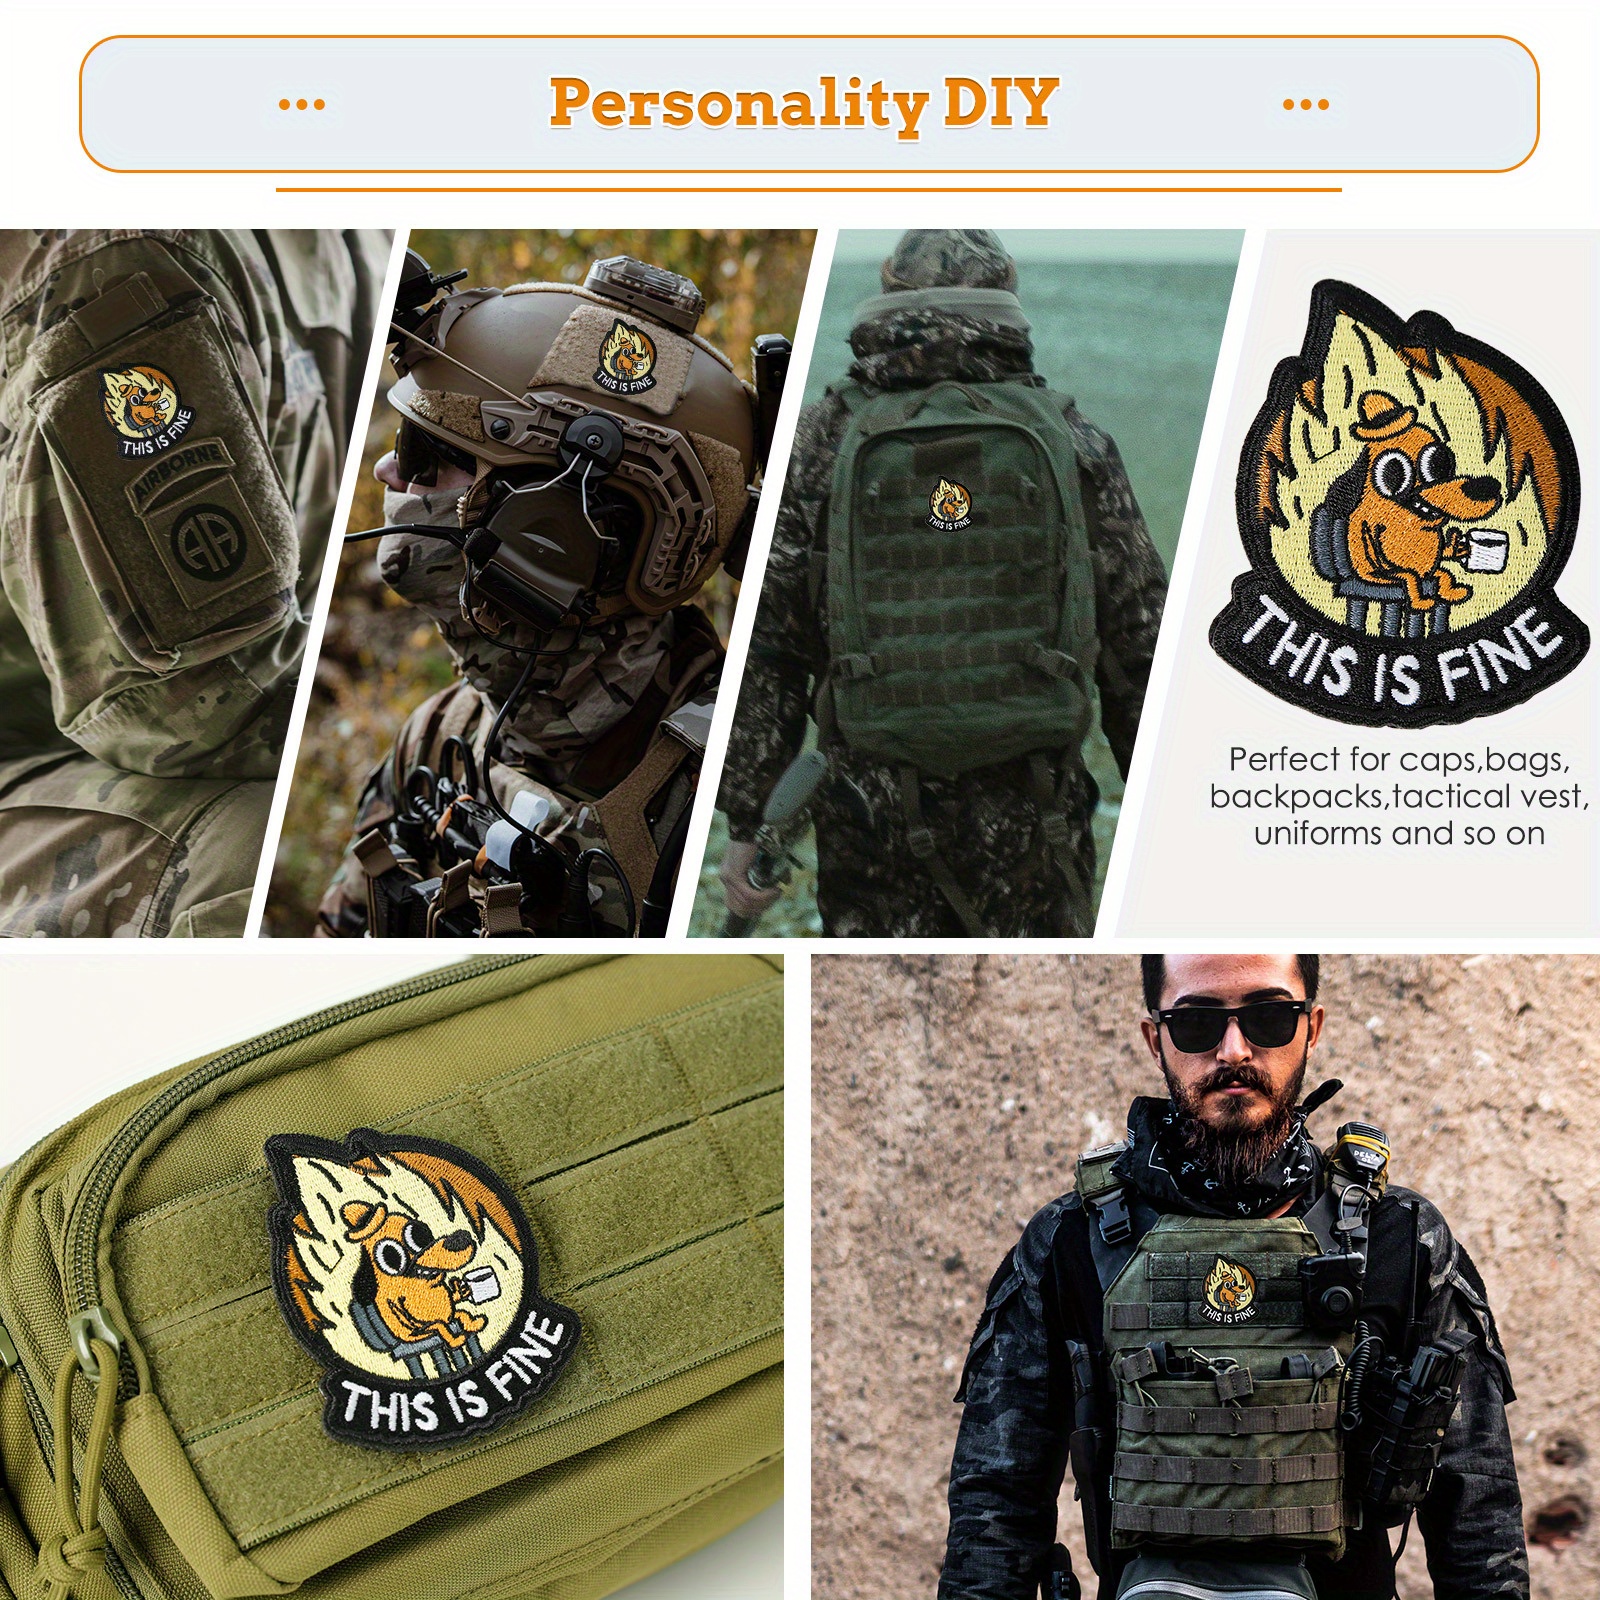  YJ PREMIUMS 9PC Funny Patches, Hook and Loop Tactical Morale  Patch for Backpack Vest, Cool Cute Small Embroidered Patche pacthes  ****This is Fine Dog